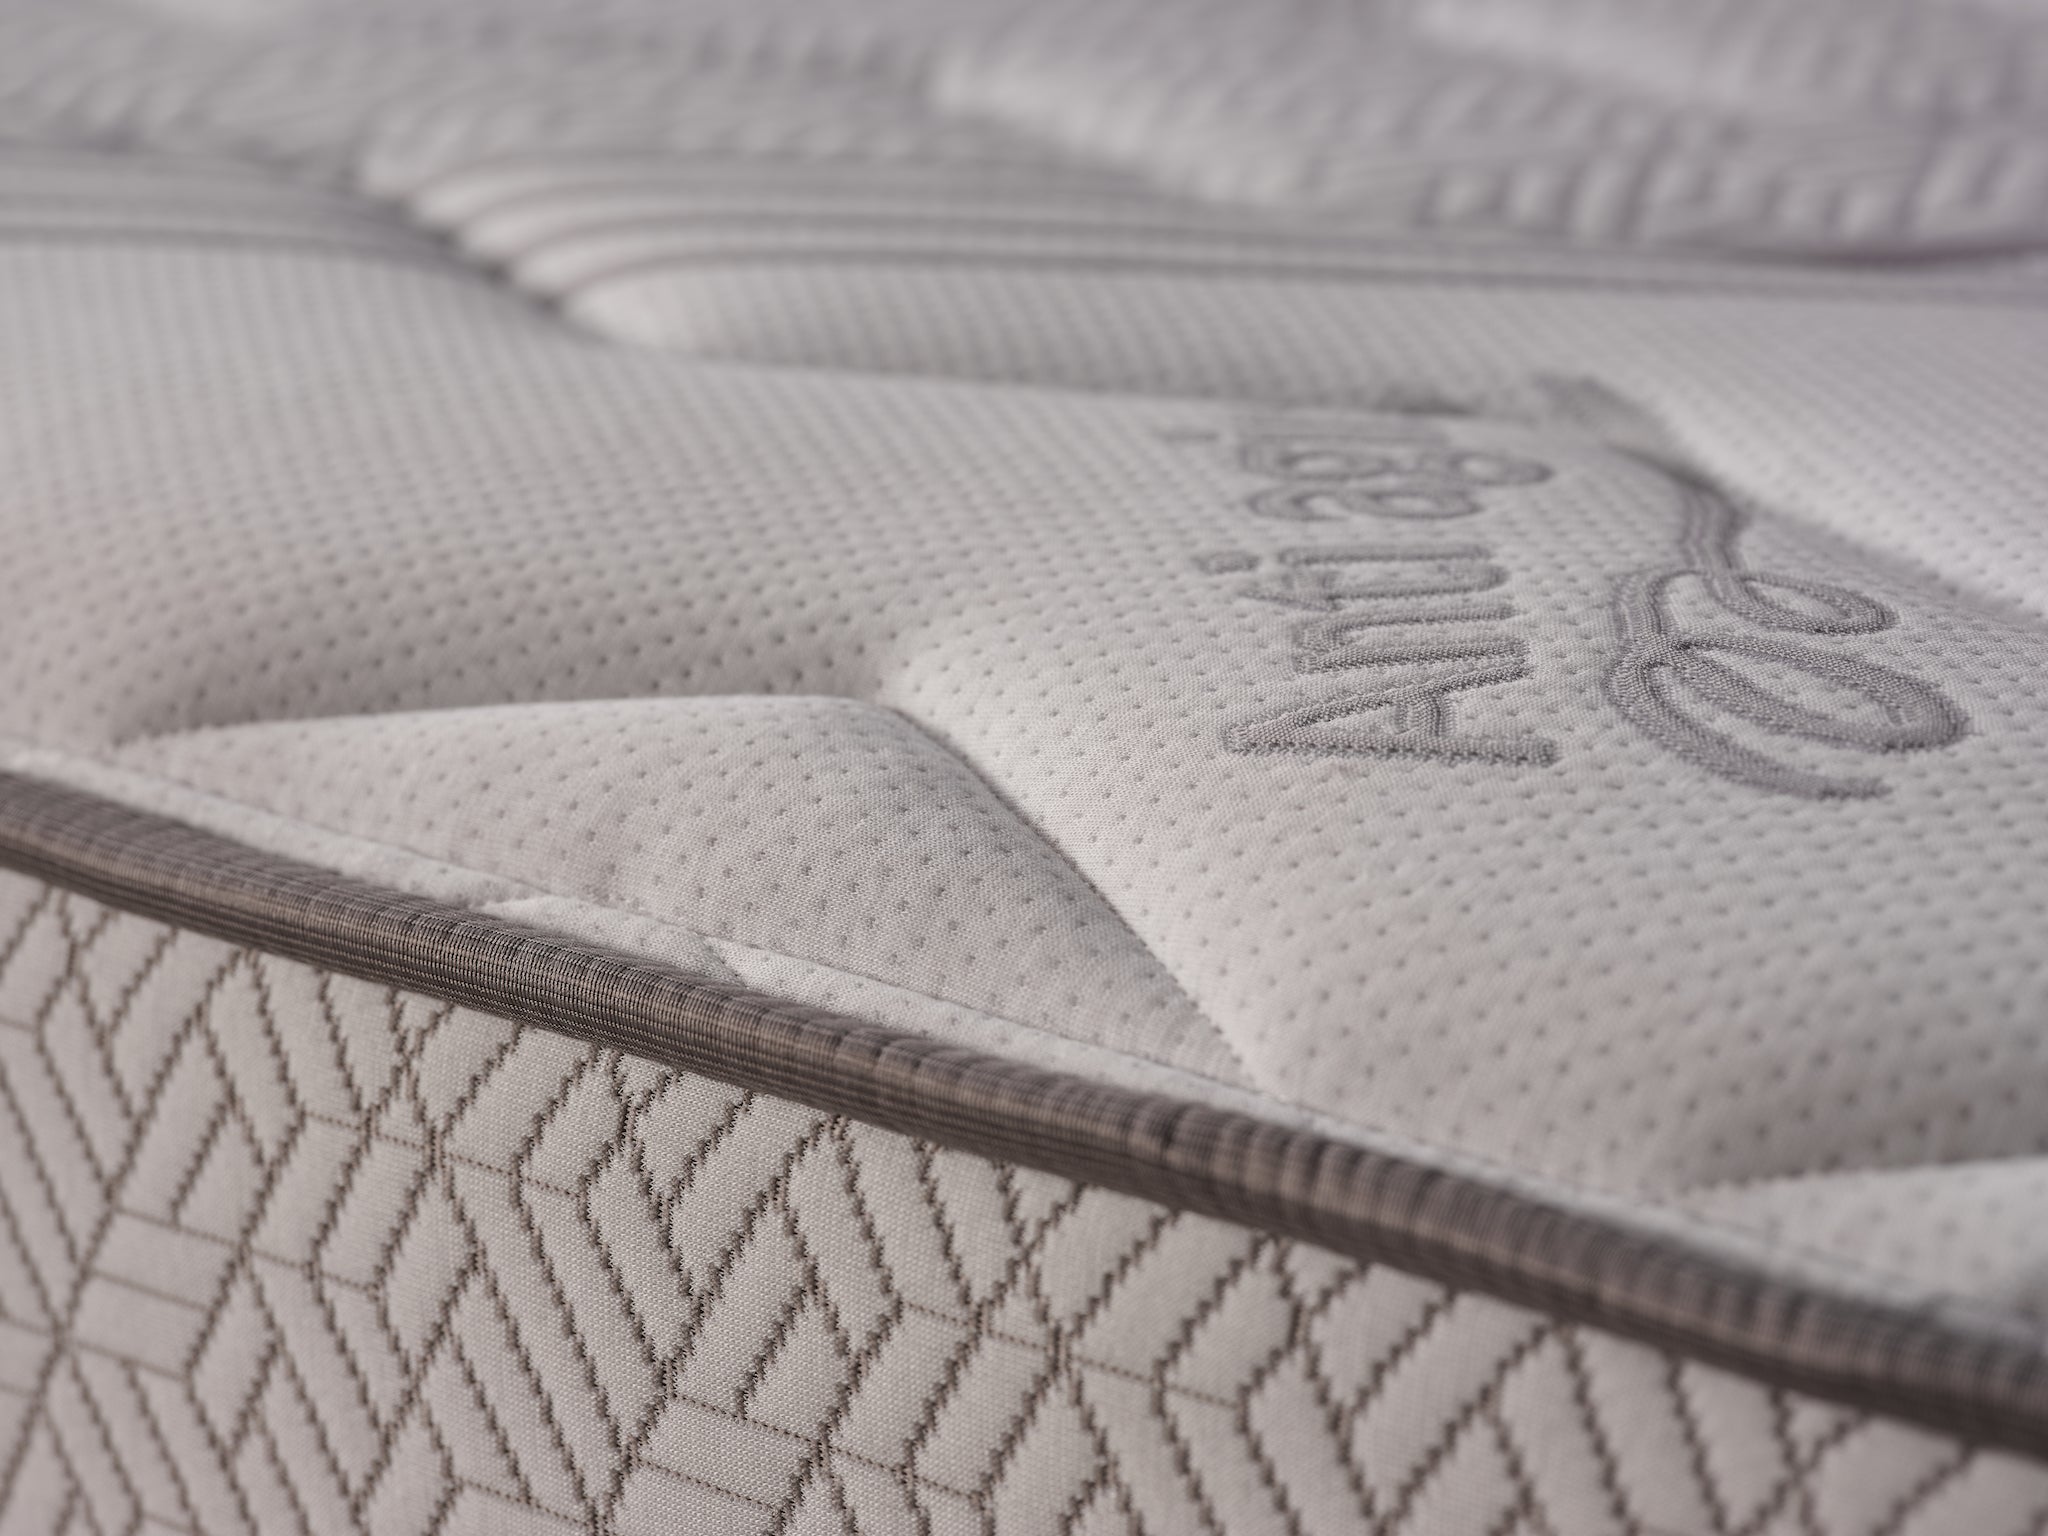 How to Choose the Best Mattress for You